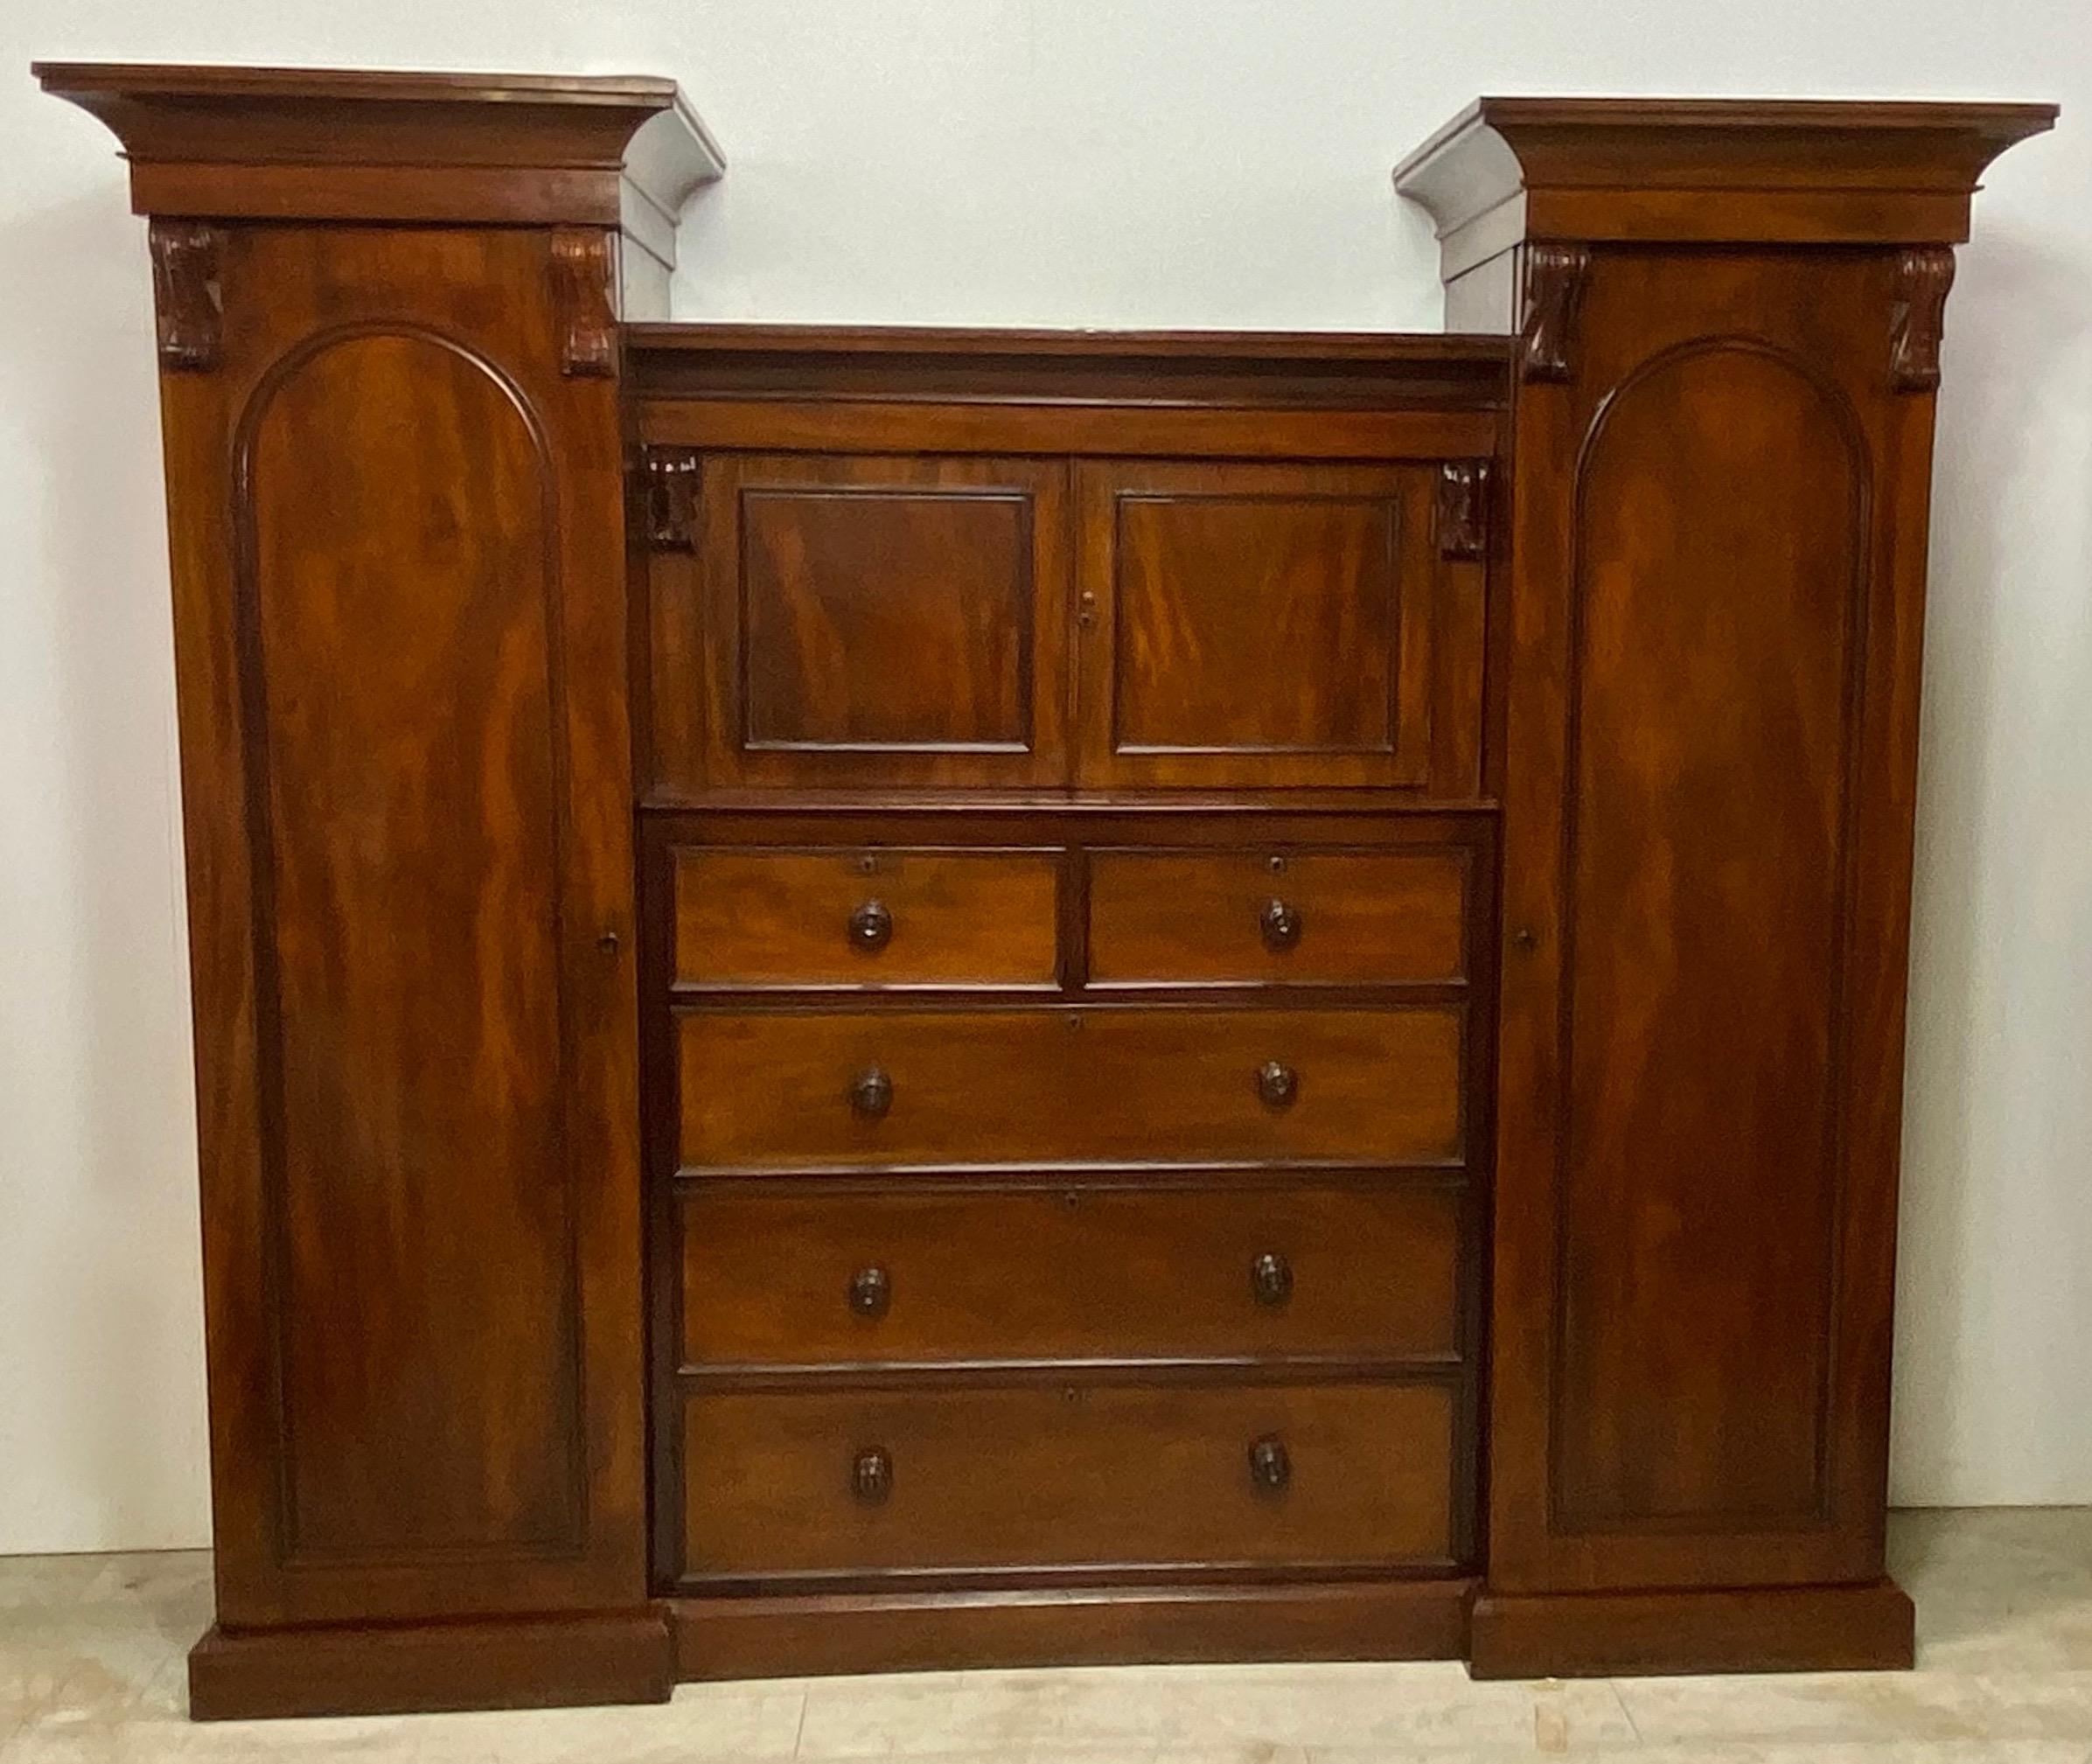 Handsome mahogany compactum / gentleman's dressing cabinet.
Having two arched panel wardrobe doors with fitted hanging bars, and a center cabinet over five drawers.
Excellent quality and condition.
England, mid 19th century.
This cabinet comes